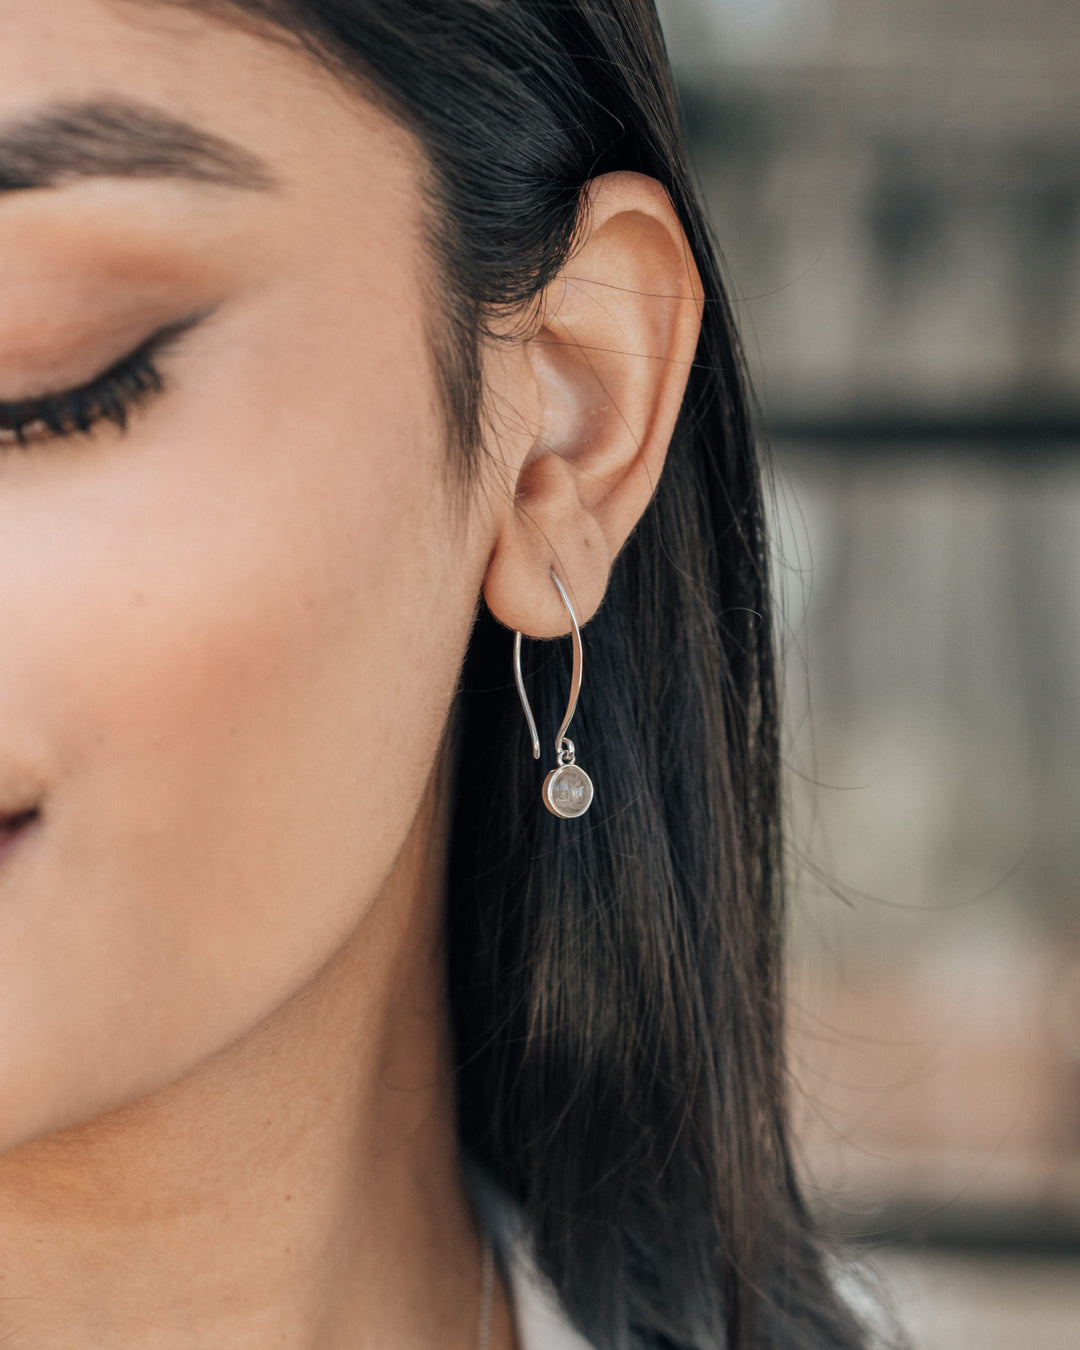 A model wearing a silver dangle earring with ashes